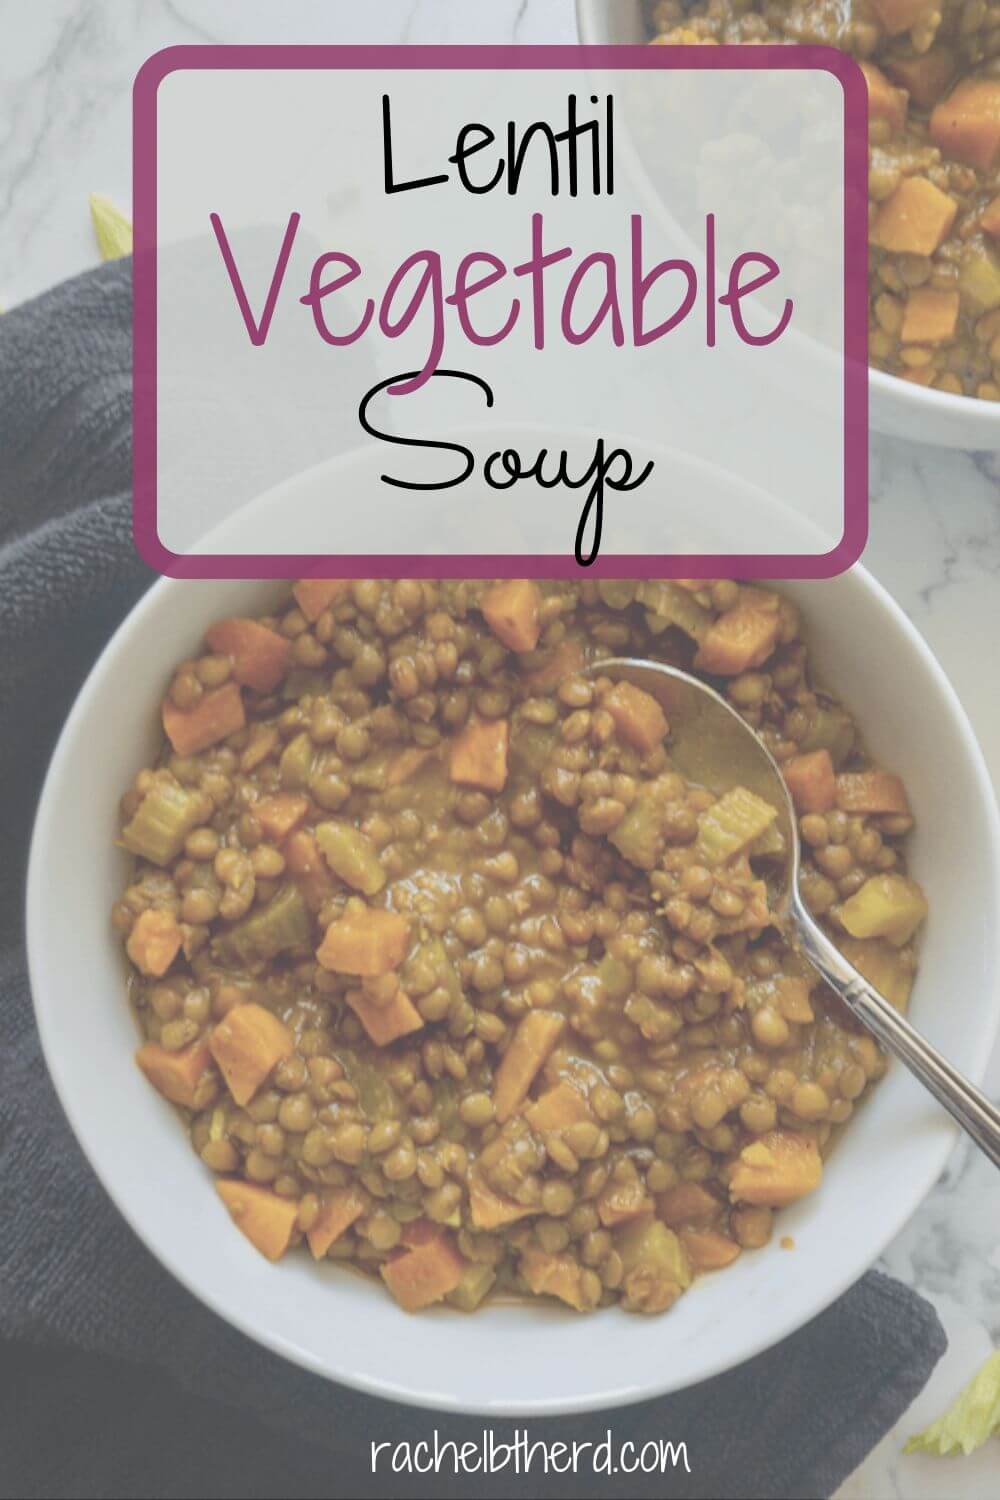 Lentil Vegetable Soup- Rachel B the RD: Packed full of vegetables, this lentil vegetable soup is full of protein, fiber, and nutrients to make a beautiful healthy meal.